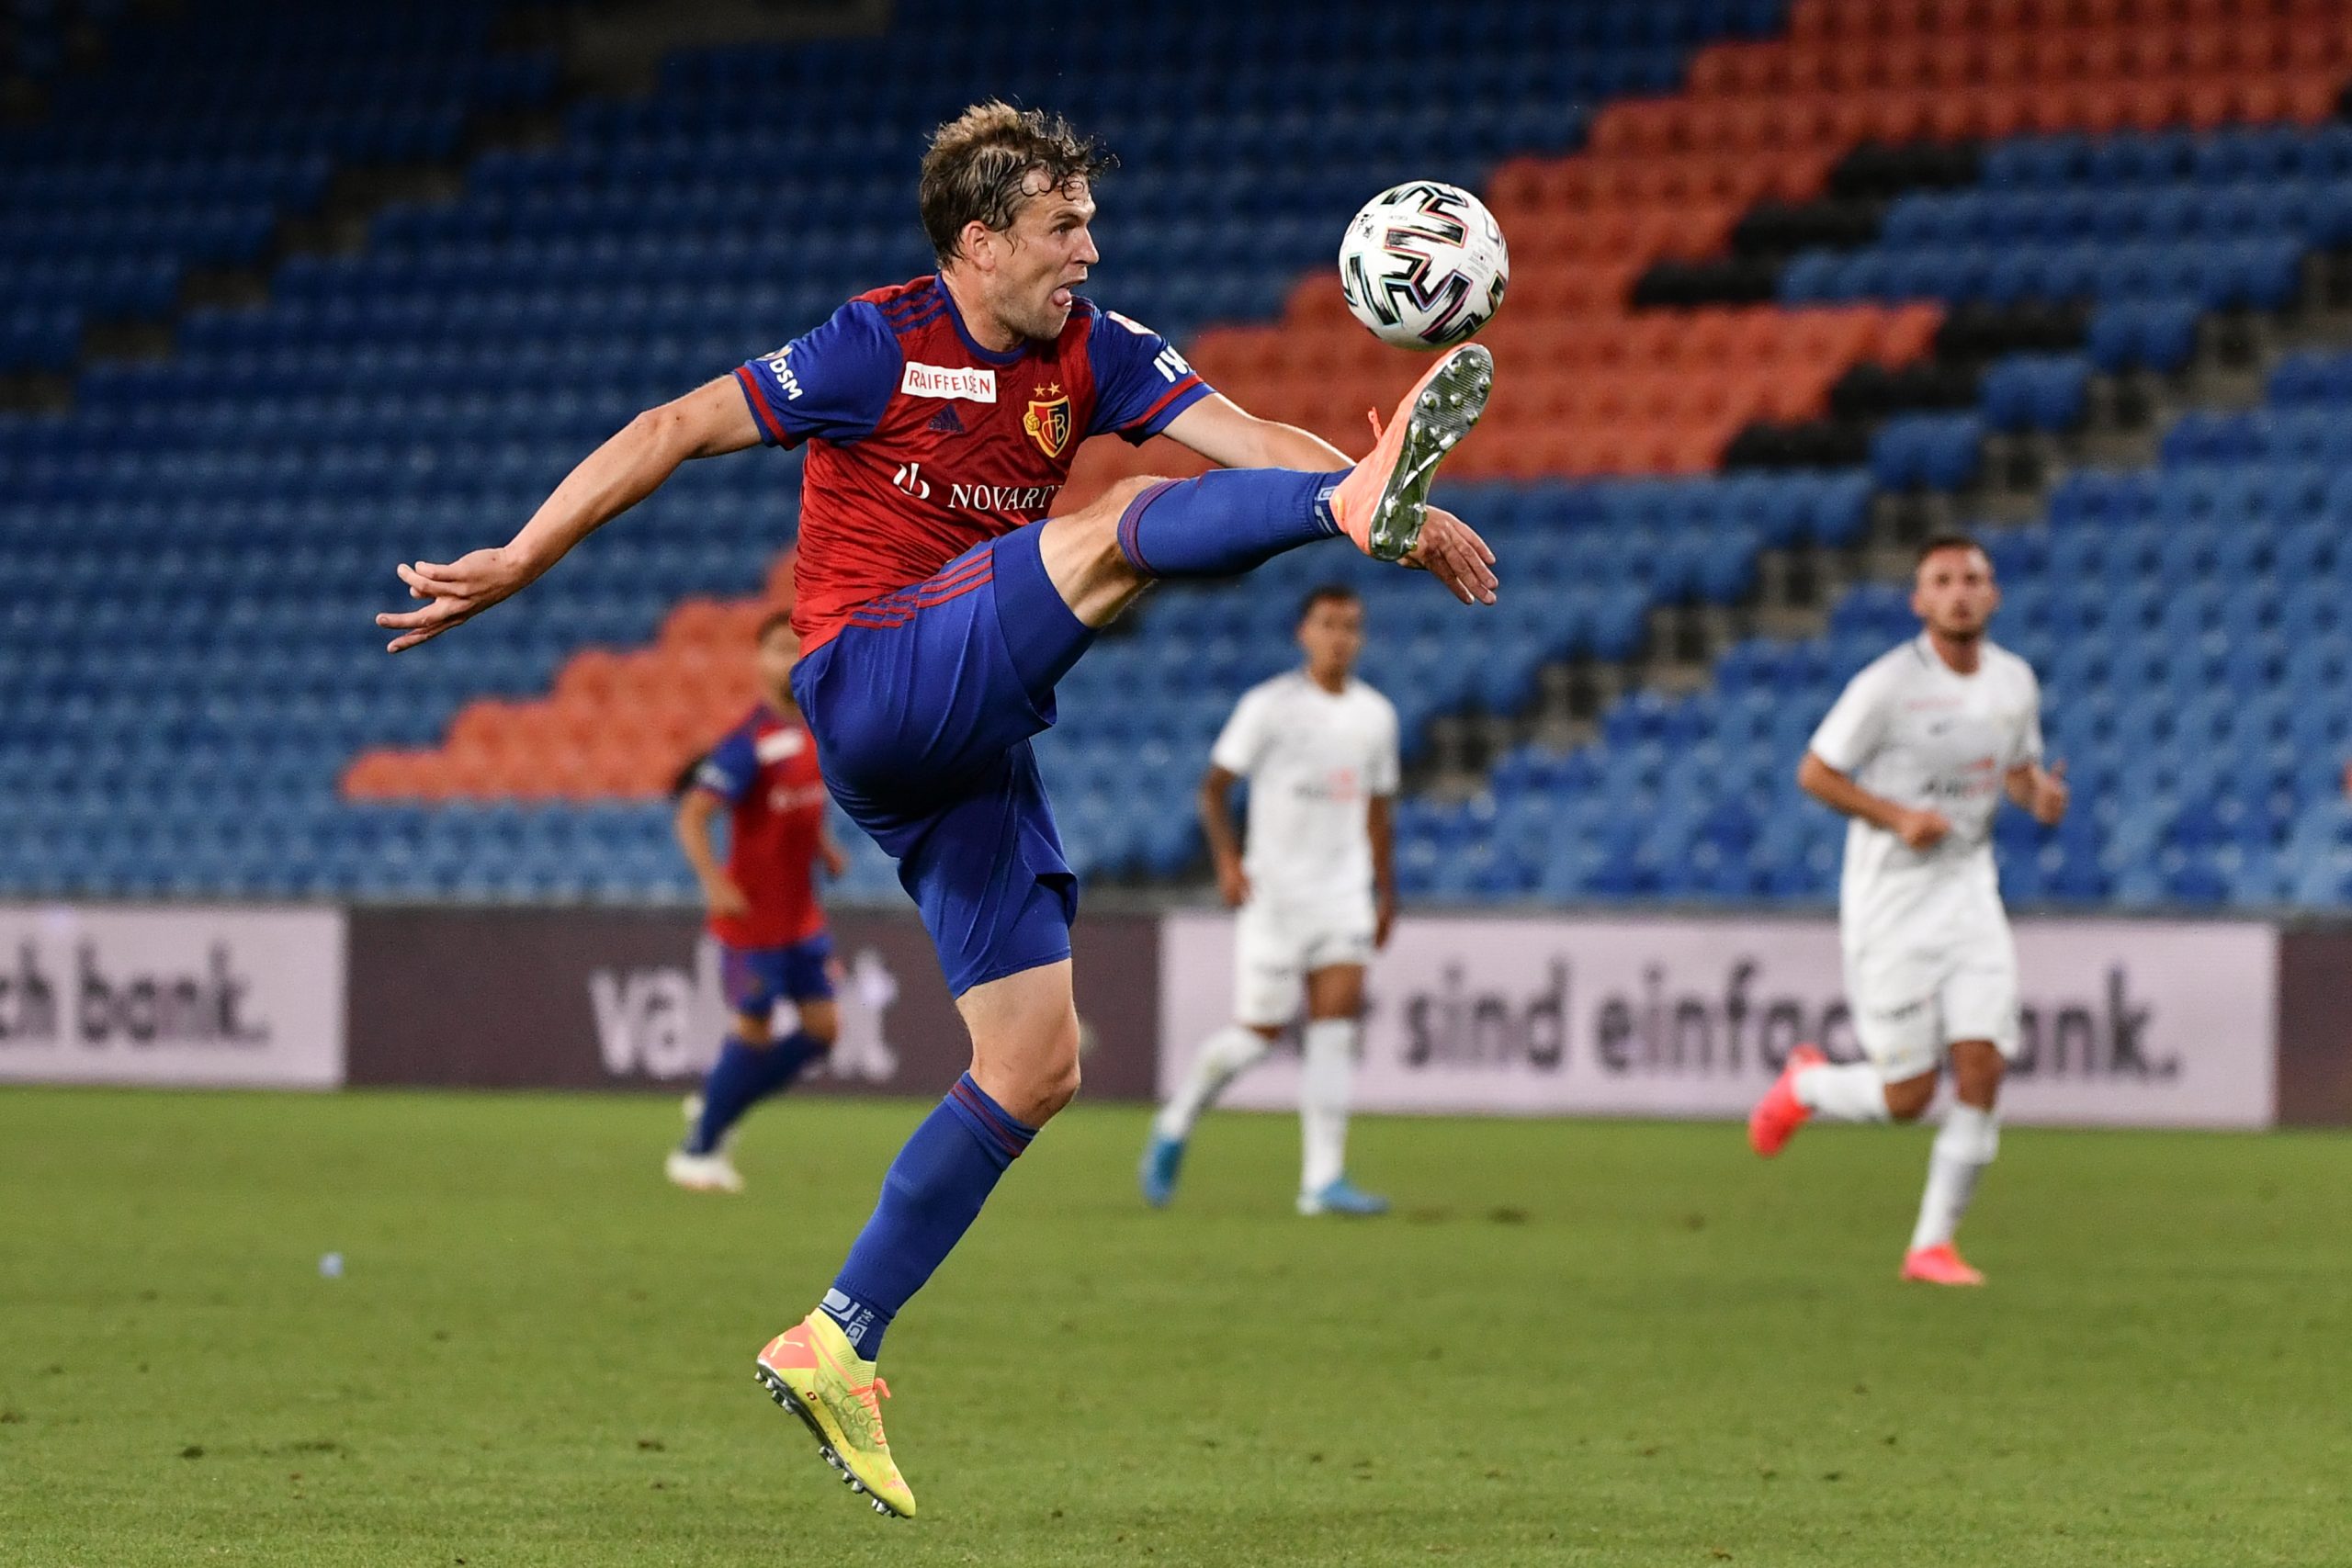 FC Basel's Swiss midfielder Fabian Frei controls the ball during the Swiss Super League football match between FC Basel and FC Zurich played with its U21 team as part of its first-team squad was placed under lockdown after six players and three staff members have been tested positive to the COVID-19, on July 14, 2020 in Basel. (Photo by Fabrice COFFRINI / AFP) (Photo by FABRICE COFFRINI/AFP via Getty Images)